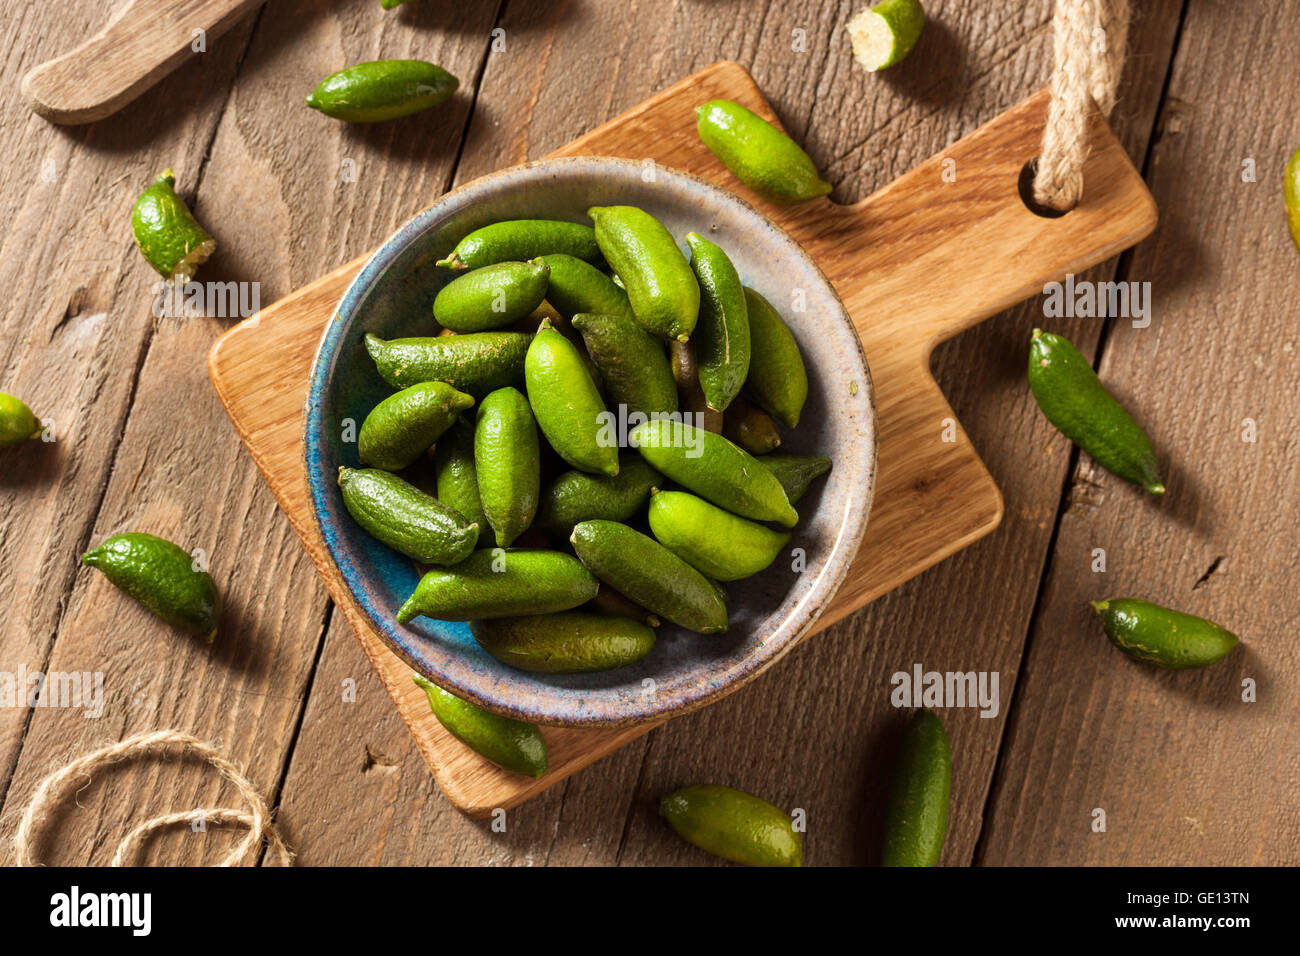 Raw Organic Green Finger Limes Ready for Eating Stock Photo